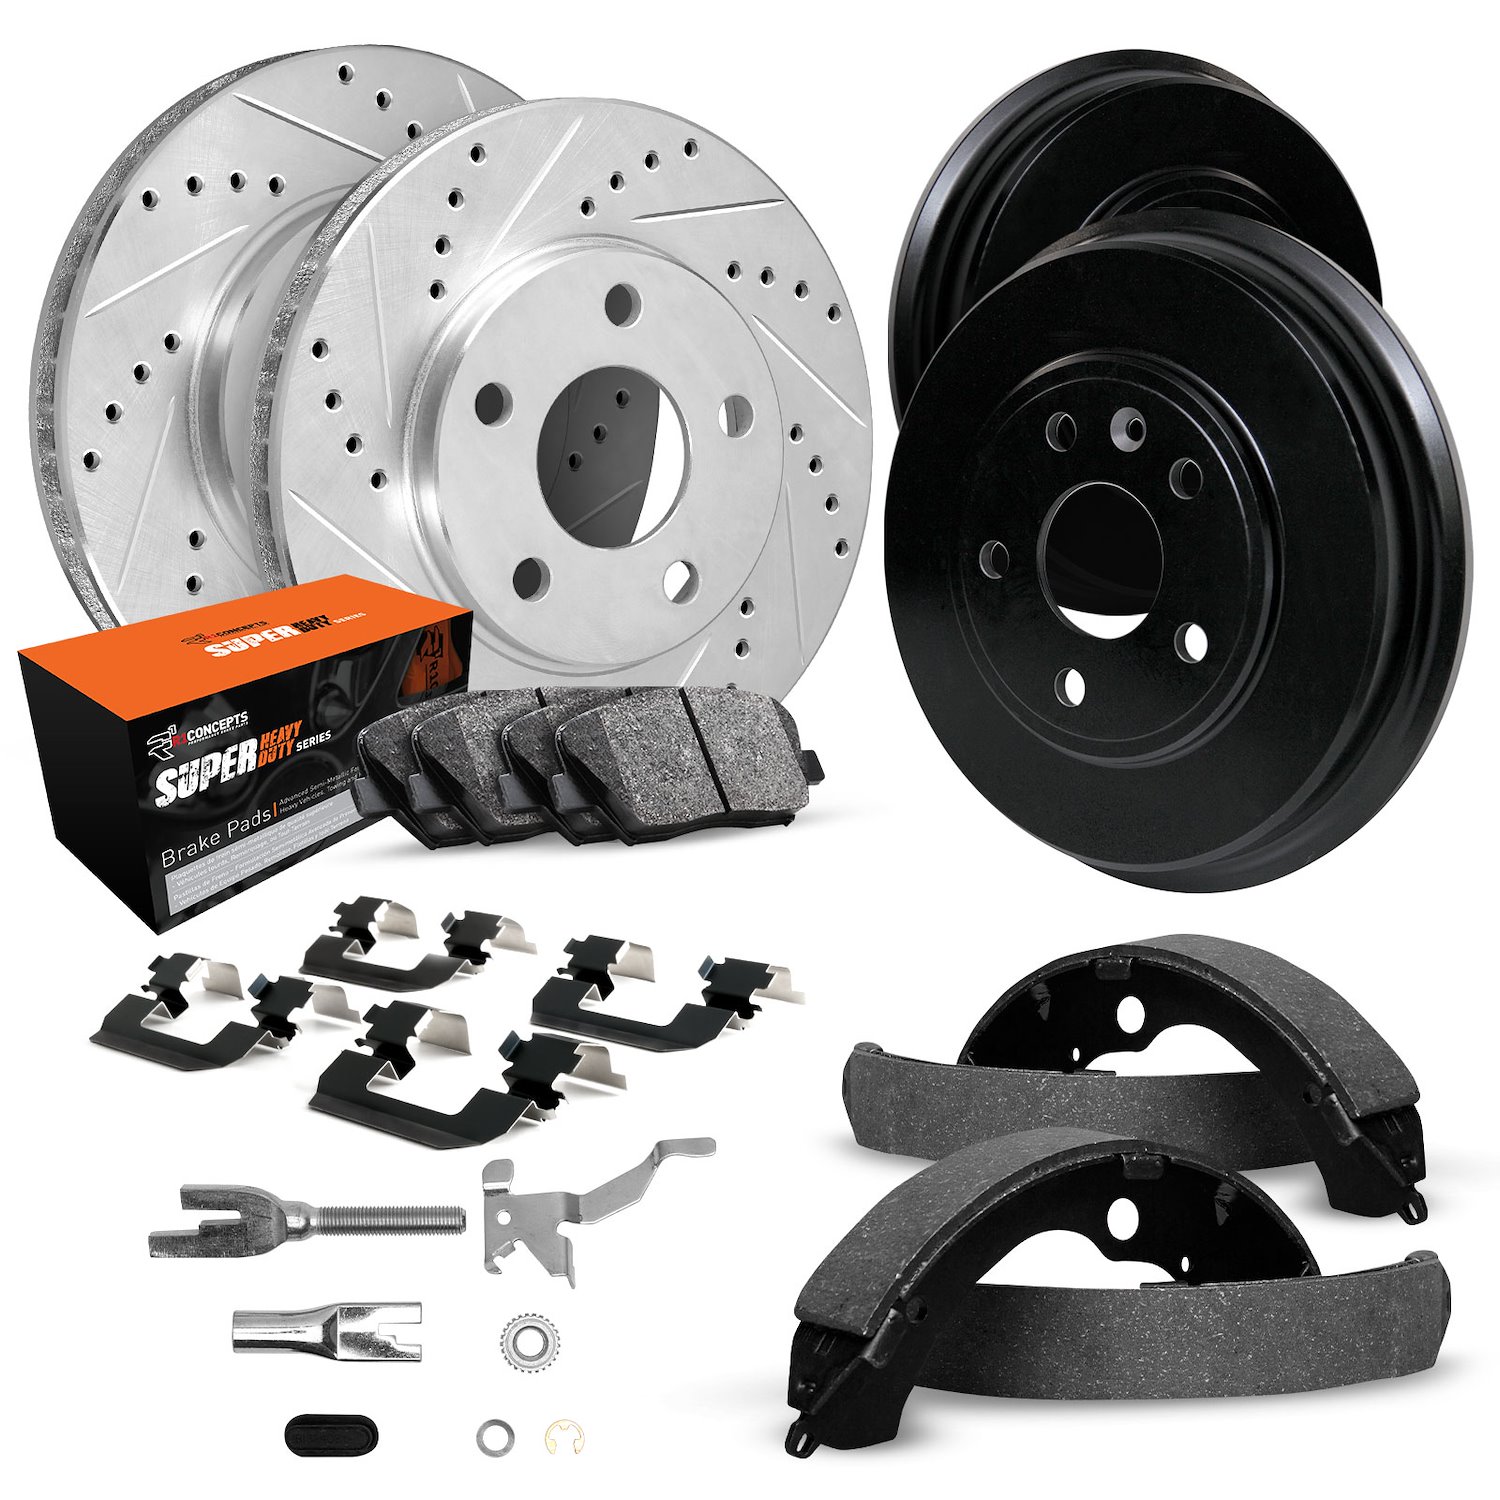 E-Line Drilled/Slotted Silver Rotor & Drum Set w/Super-Duty Pads, Shoes/Hardware/Adjusters, 2002-2007 GM